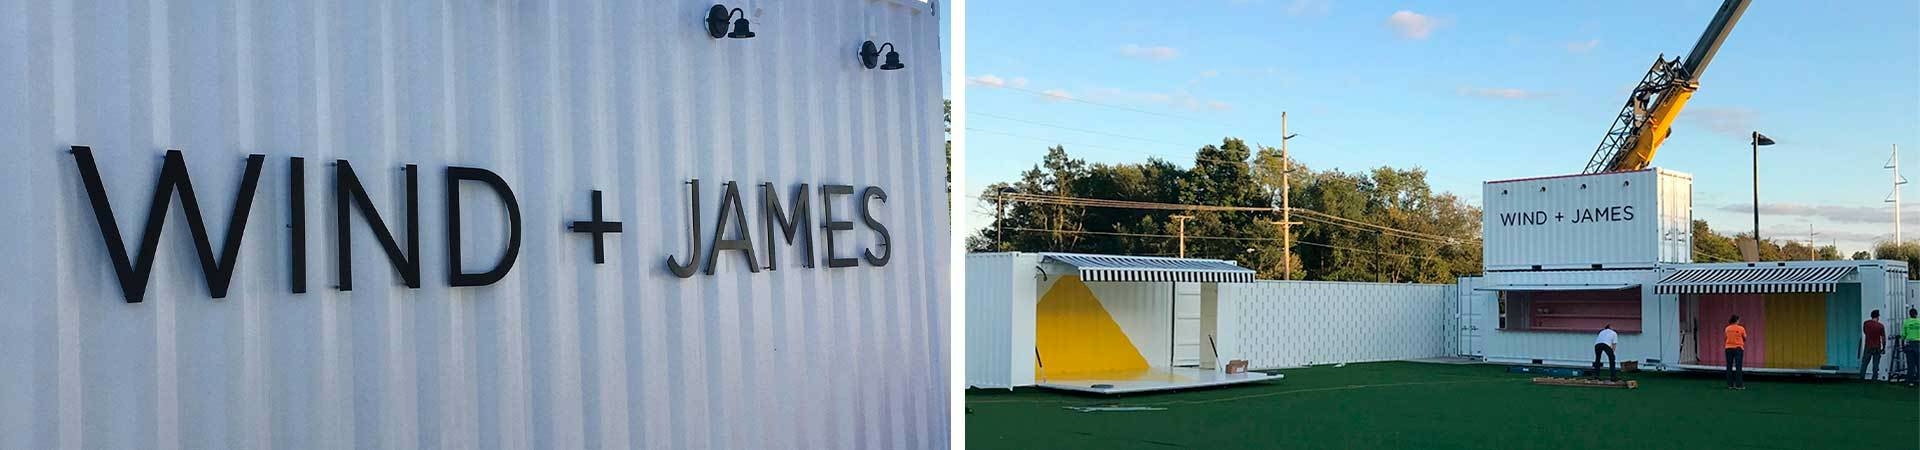 Custom branded box pop shipping containers at an outdoor event space.